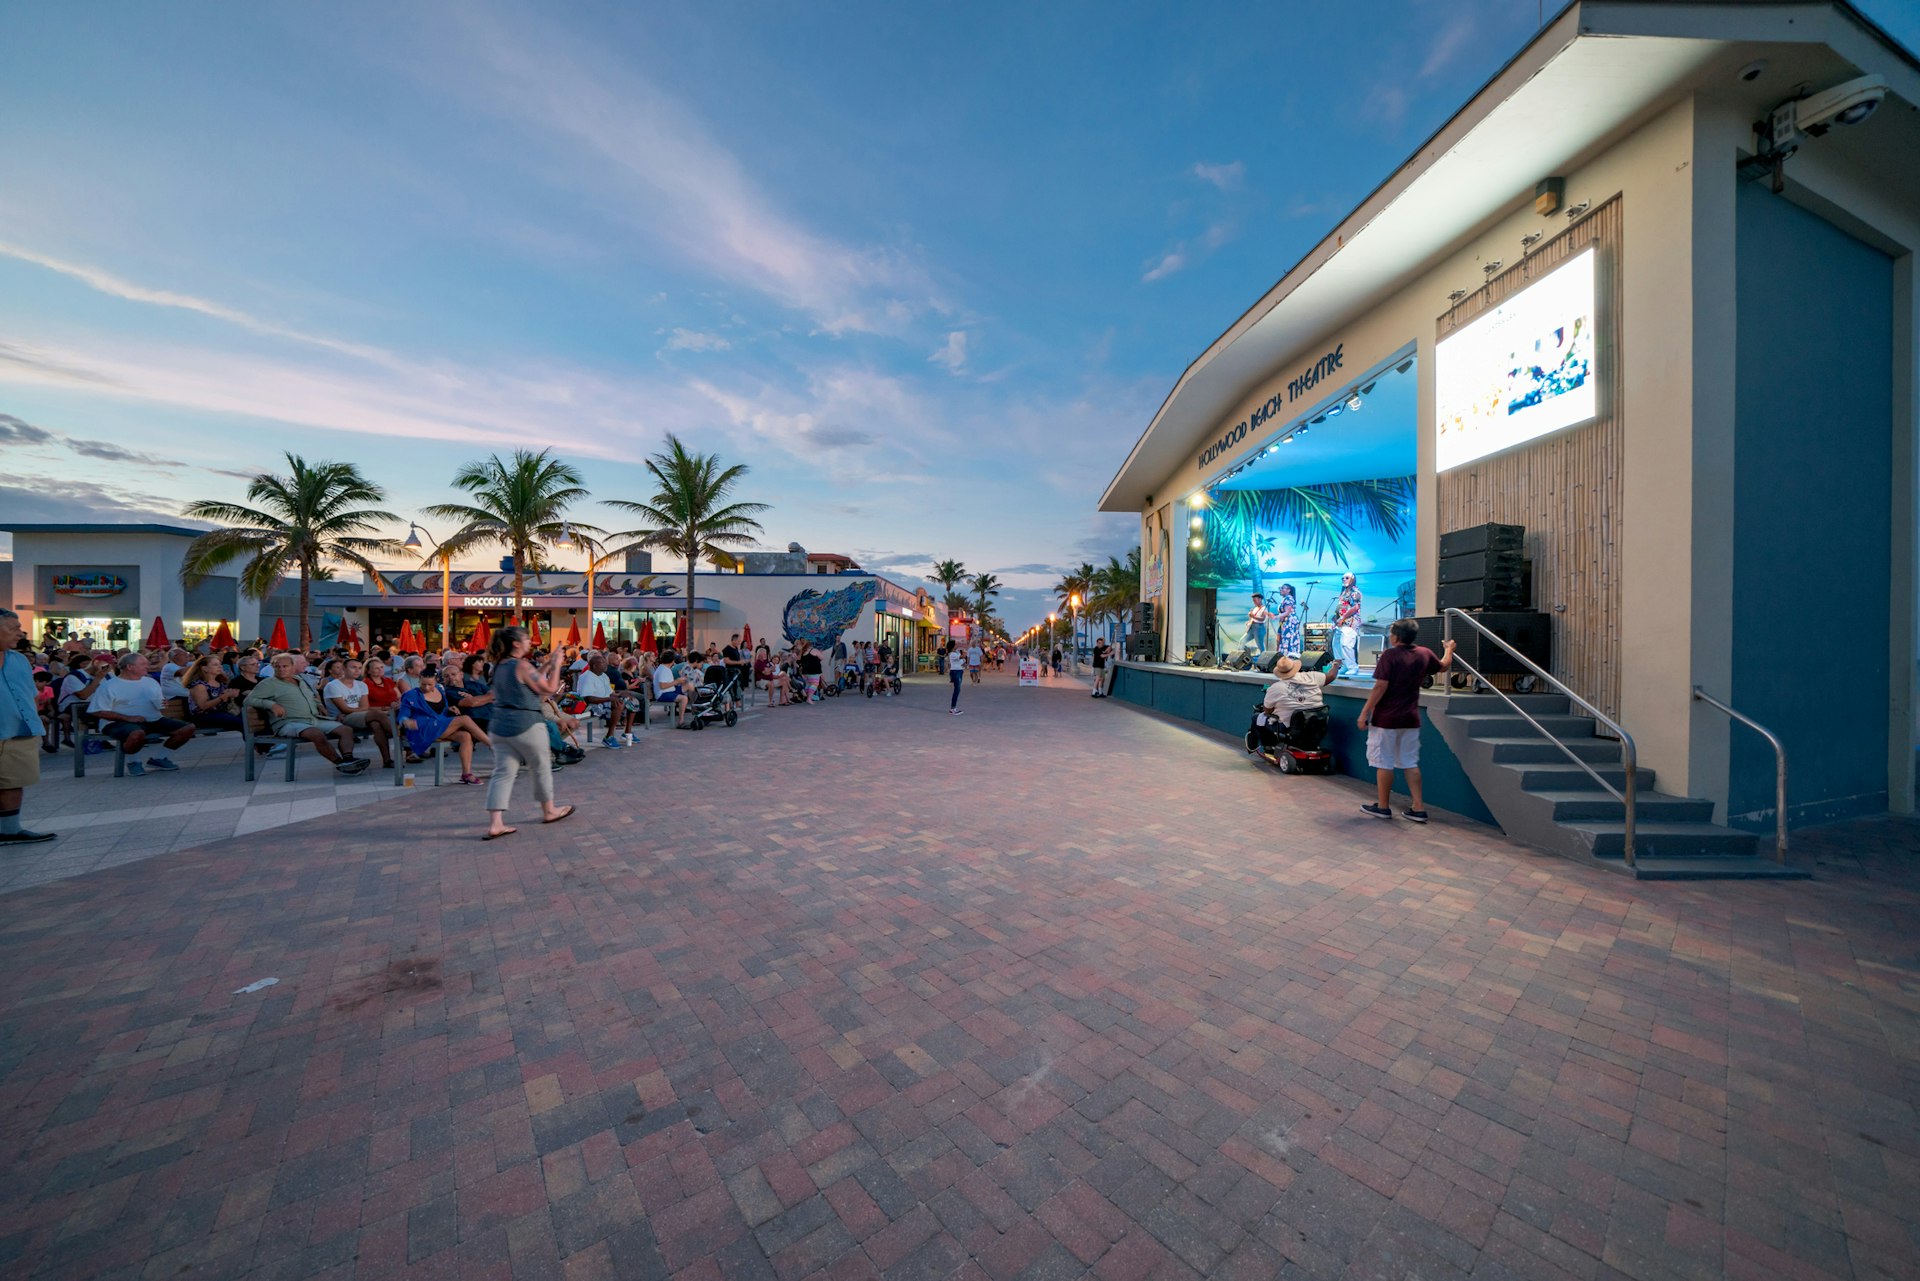 An outdoor live music venue next to the beach